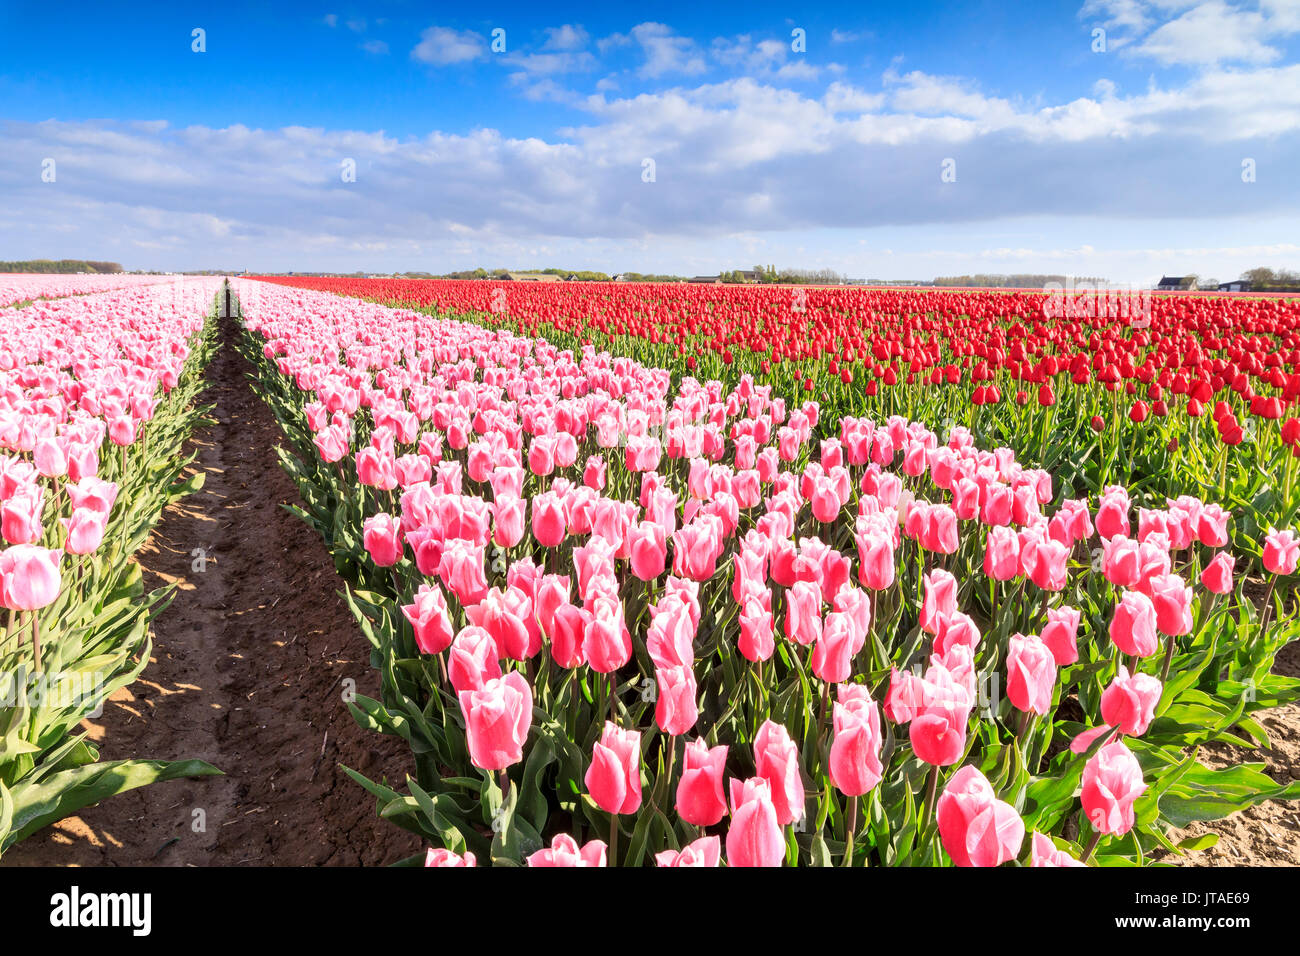 Multicolored tulips in the fields of Oude-Tonge during spring bloom, Oude-Tonge, Goeree-Overflakkee, South Holland, Netherlands Stock Photo